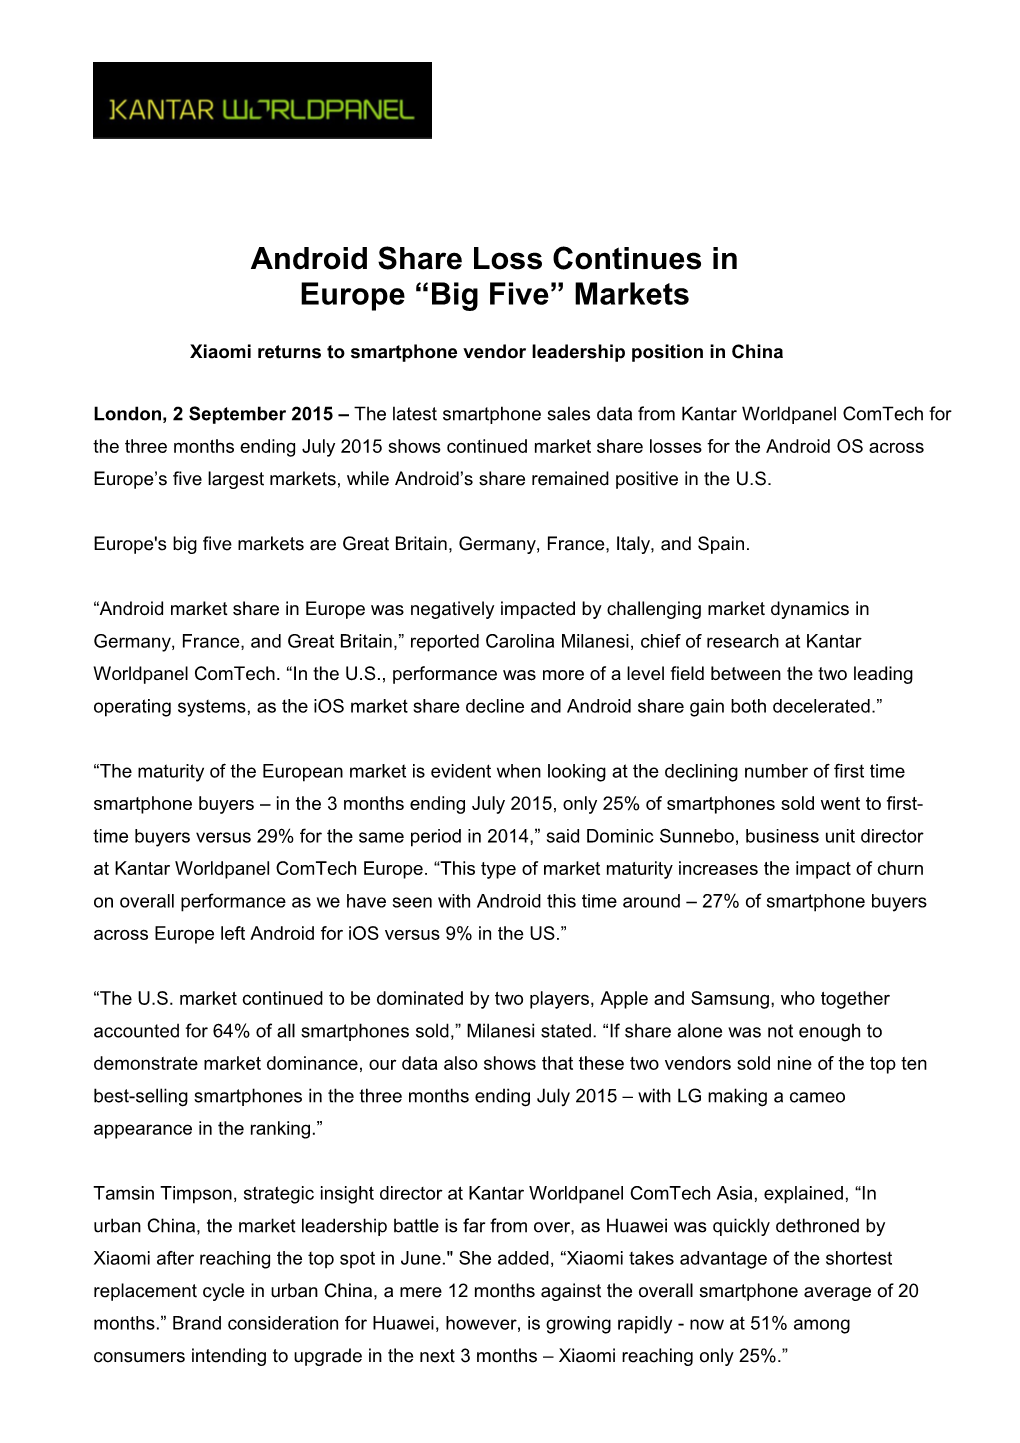 Android Share Loss Continues in Europe Big Five Markets